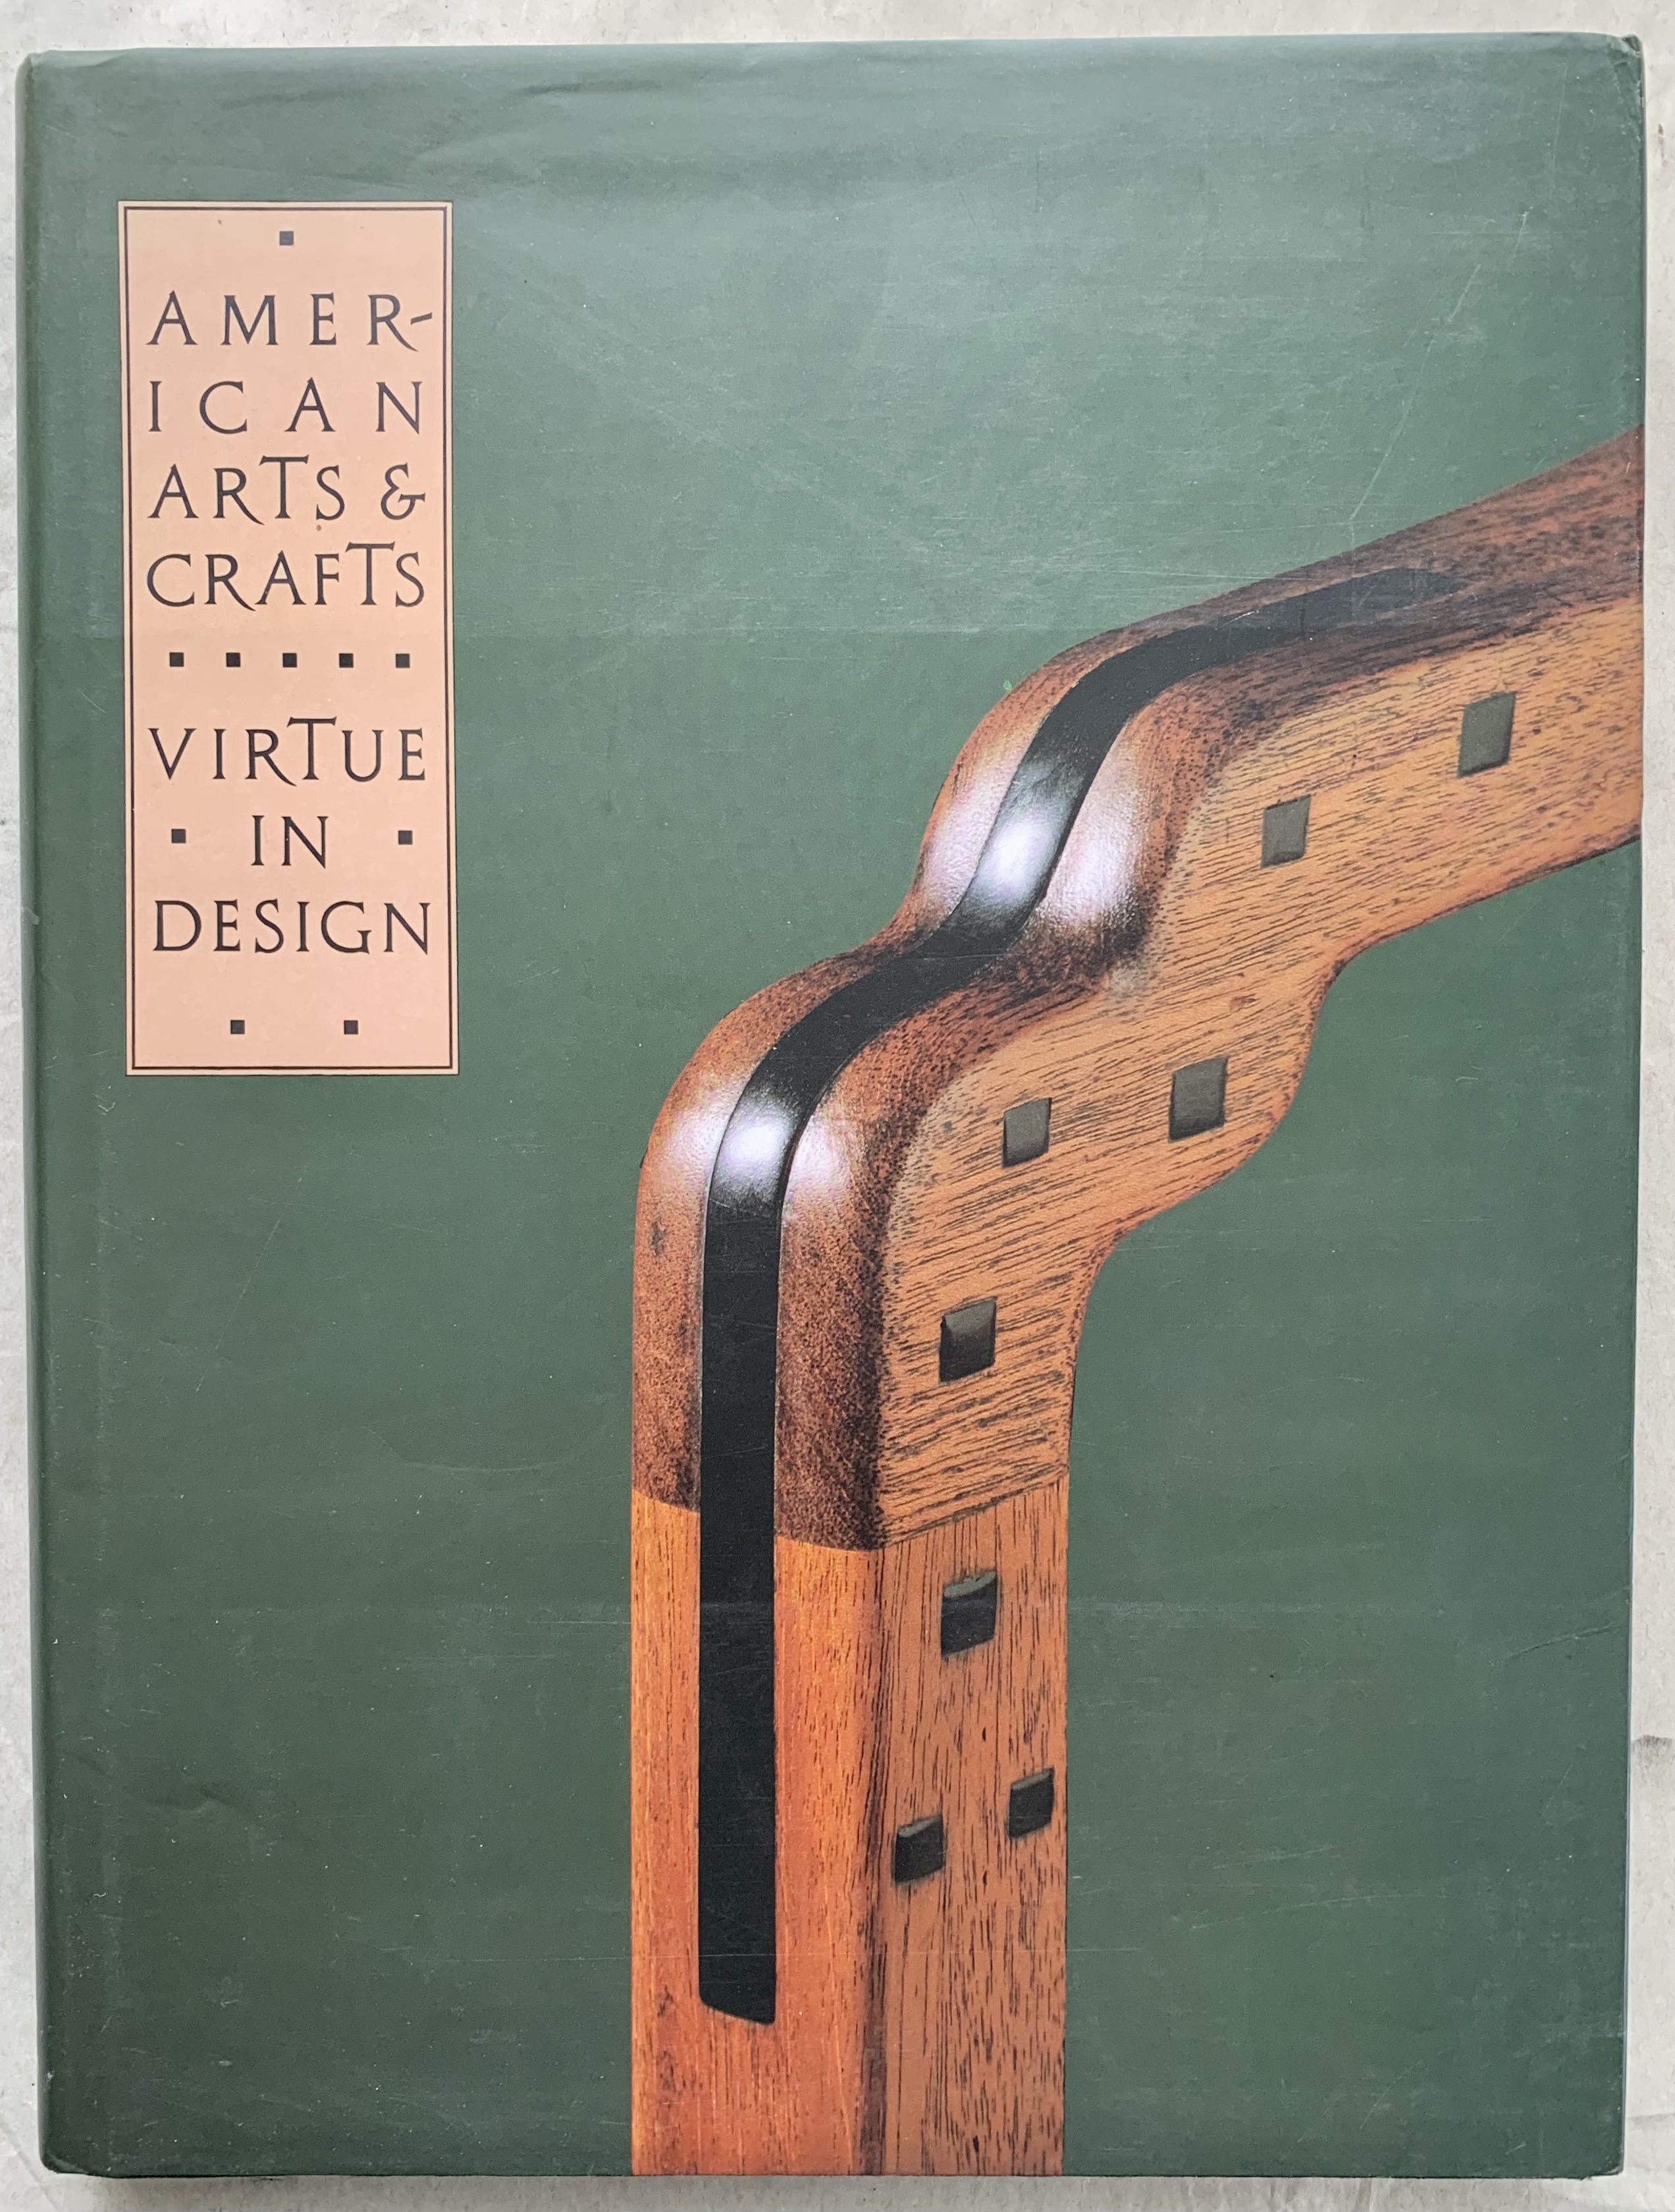 ARTS & CRAFTS MOVEMENT 101 – LES Collection